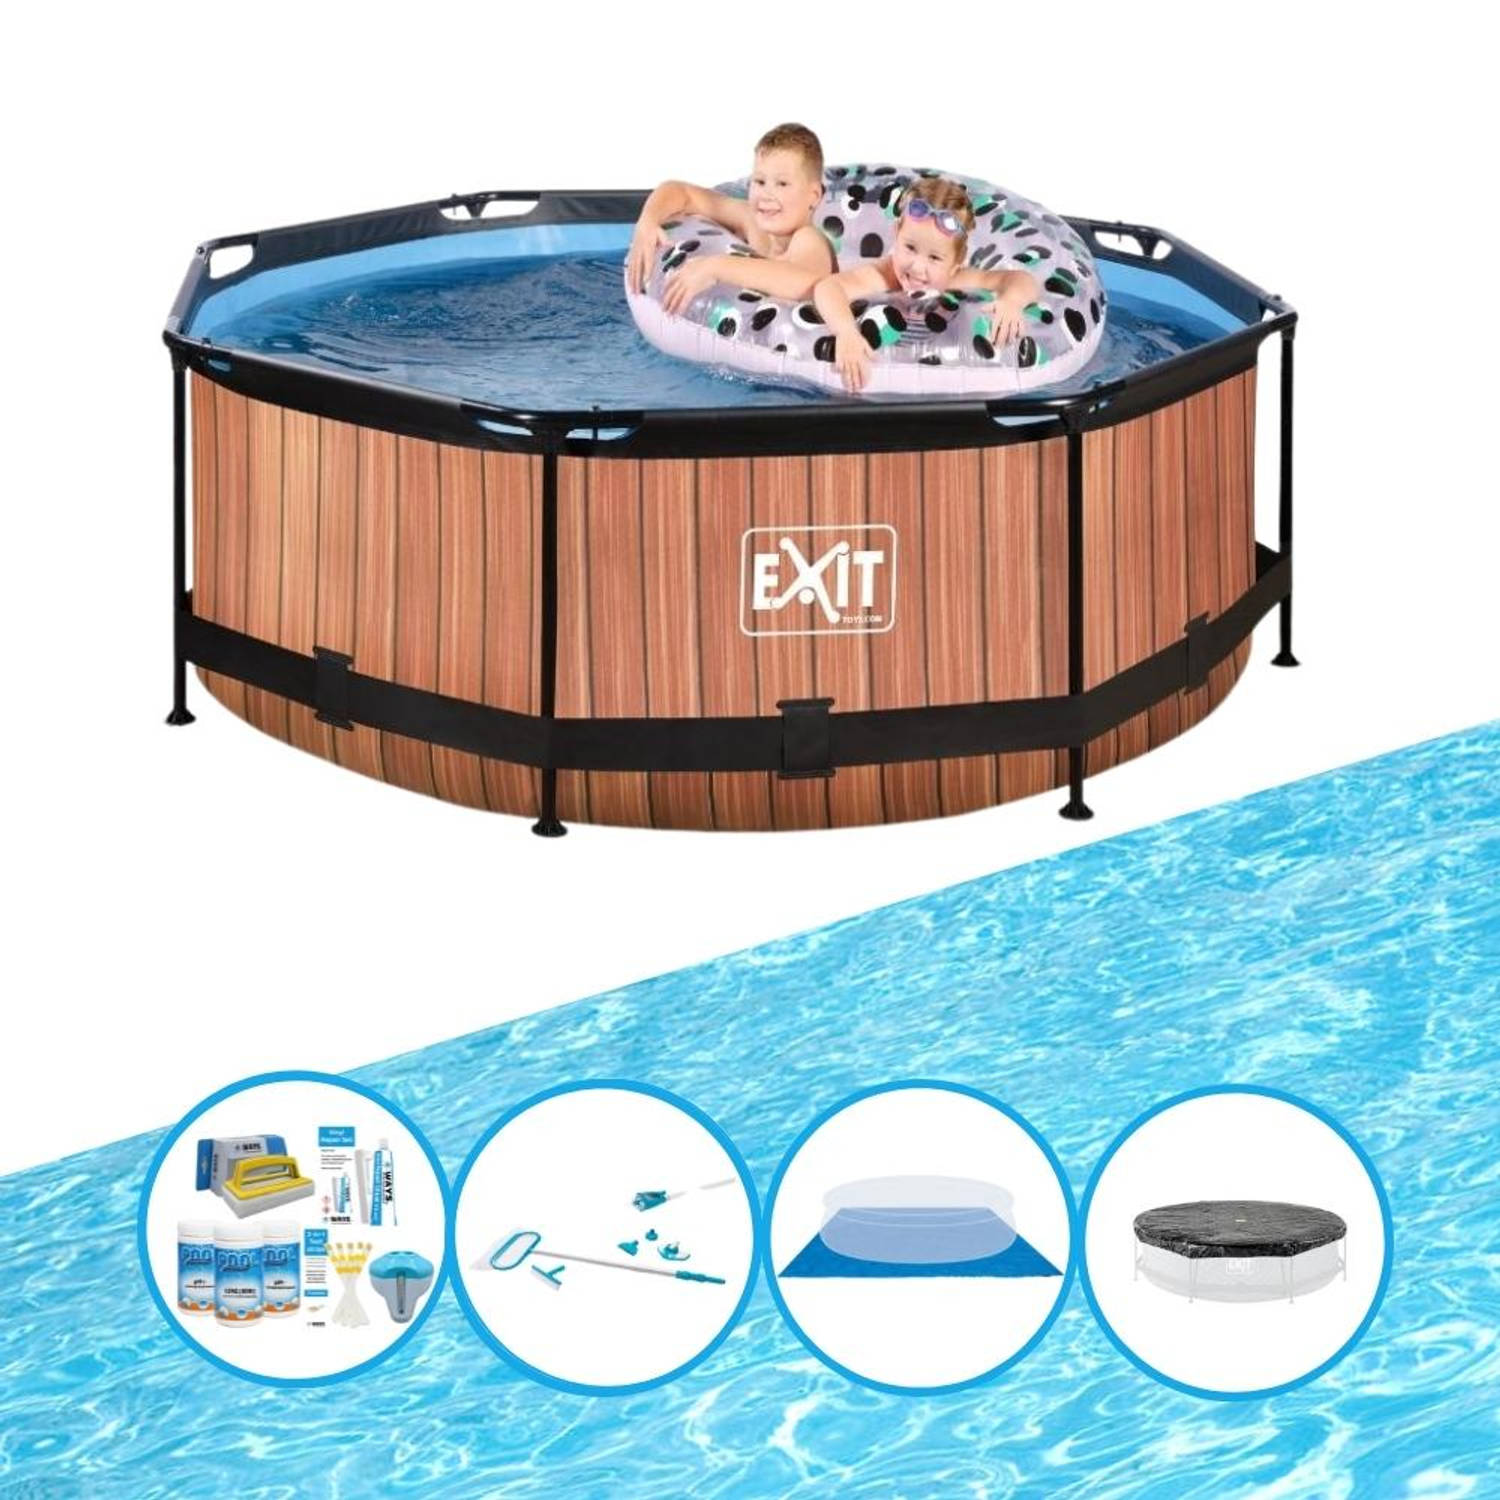 EXIT Zwembad Timber Style - Frame Pool ø244x76cm - Compleet zwembadpakket